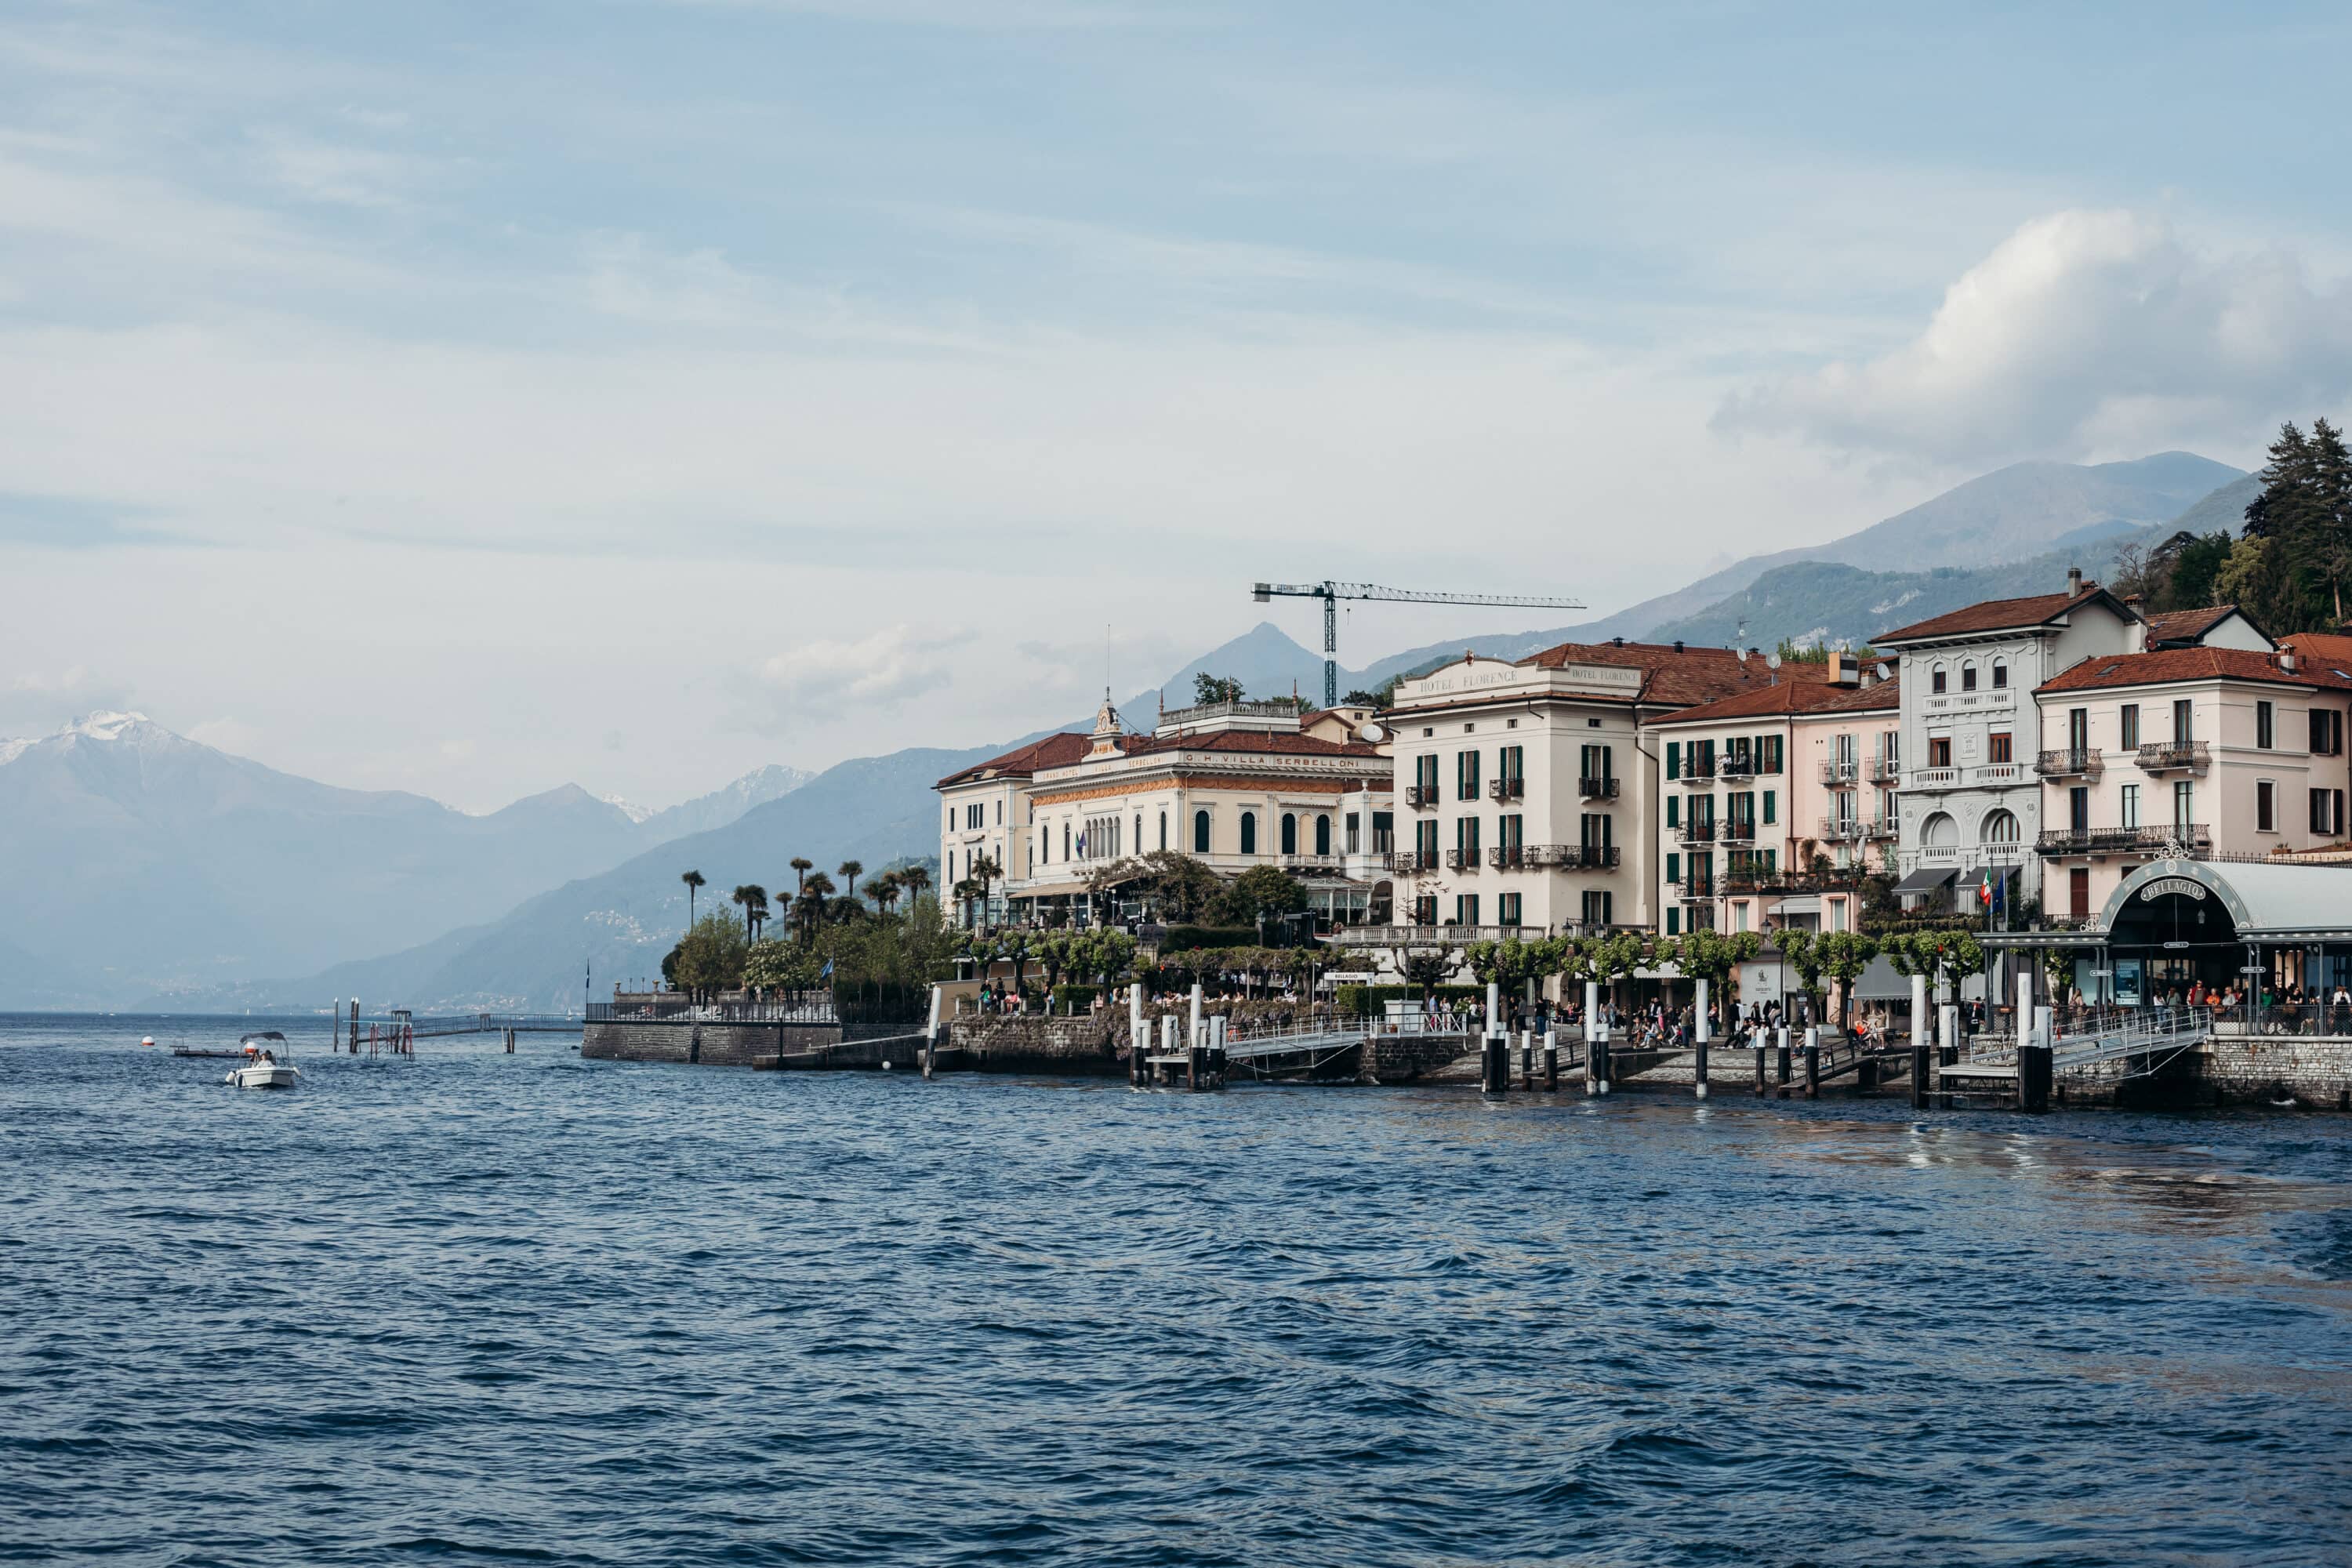 Our Milan and Venice itinerary included a trip to Lake Como